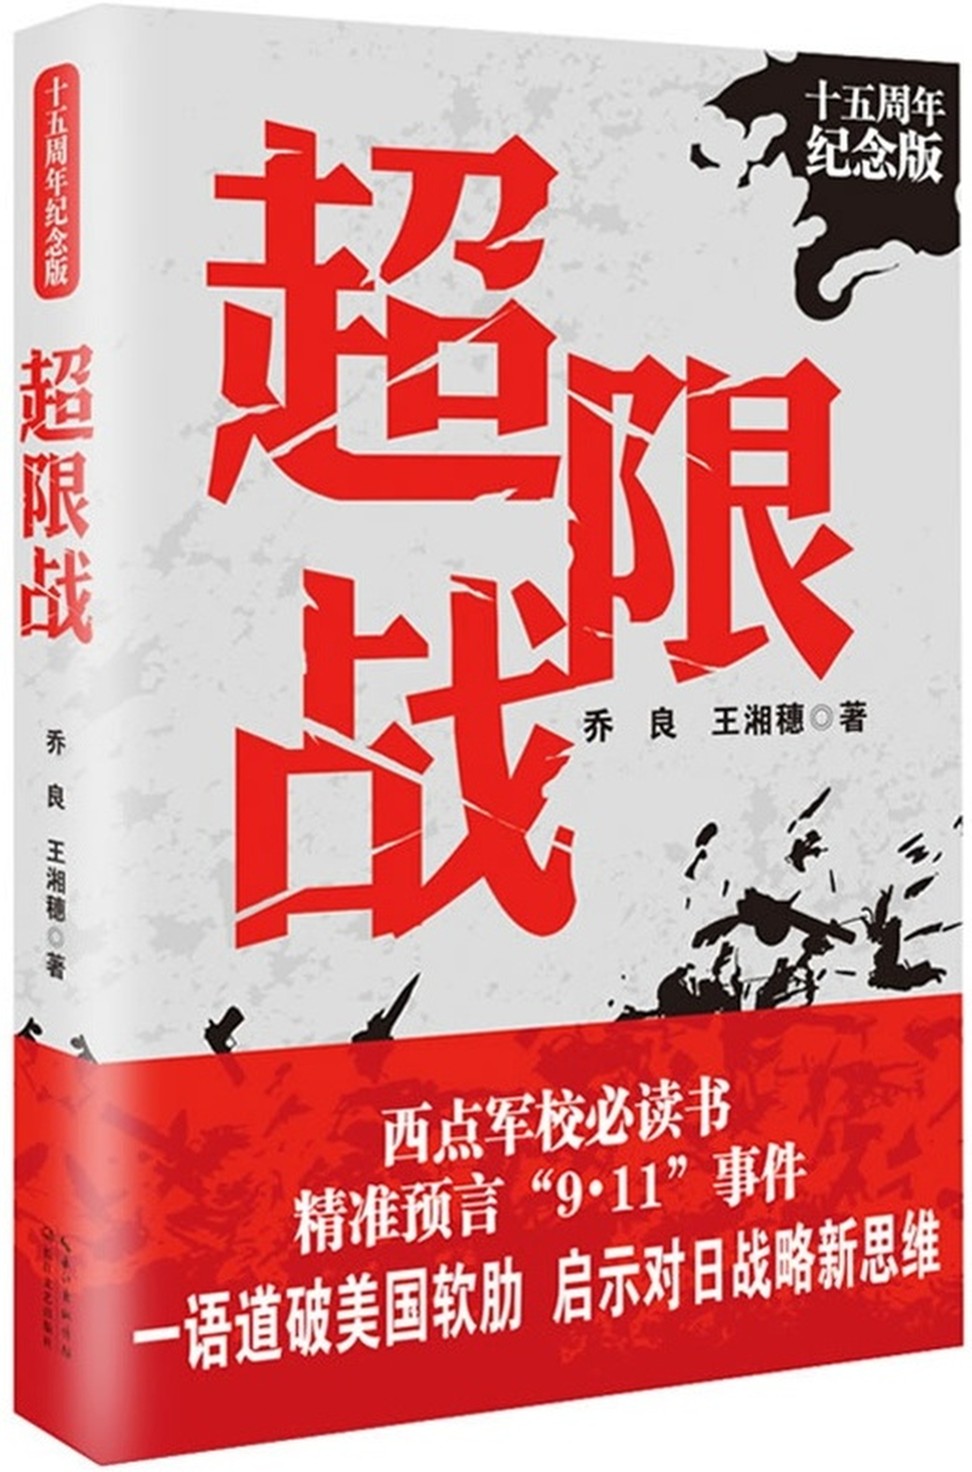 Military strategist Qiao Liang says the English translation of his book is filled with errors. Photo: Handout.